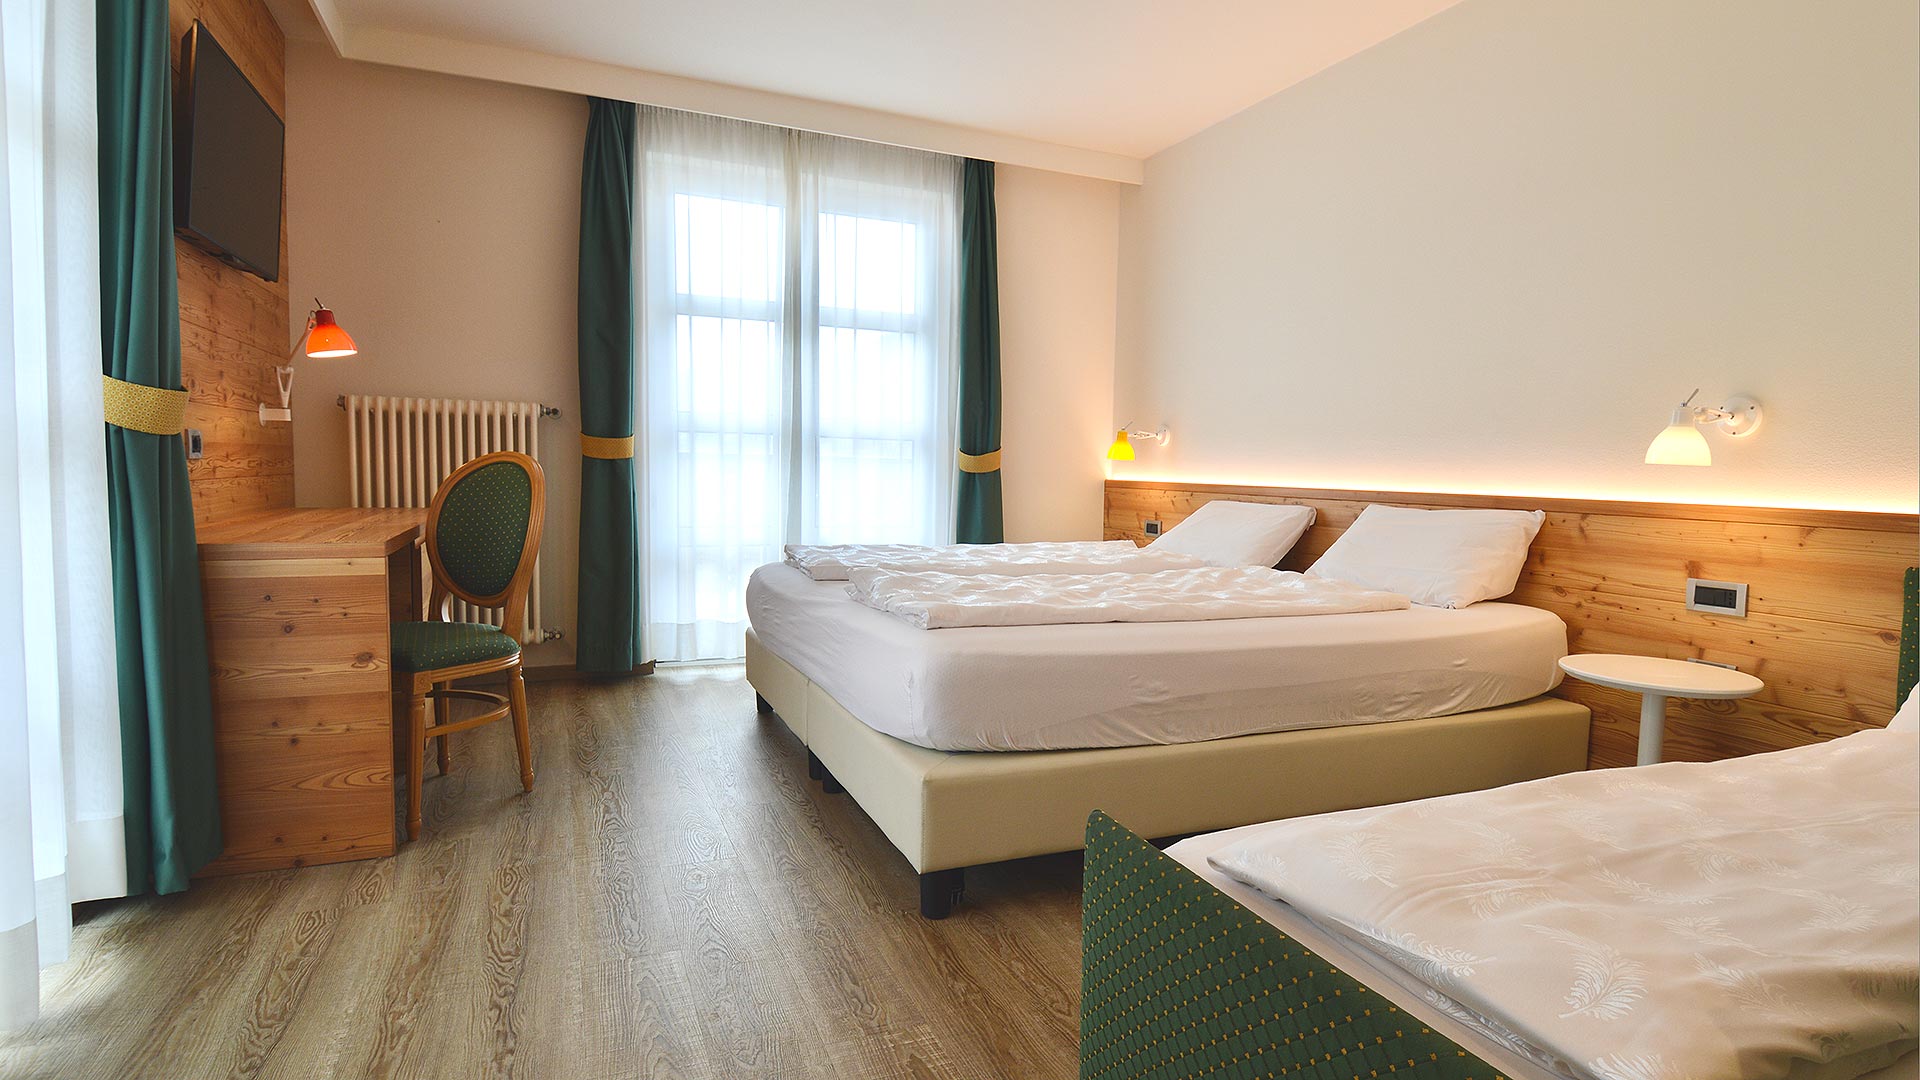 Our hotel in Dimaro, Val di Sole, will allow you to relax, together with your family, in a cosy atmosphere.